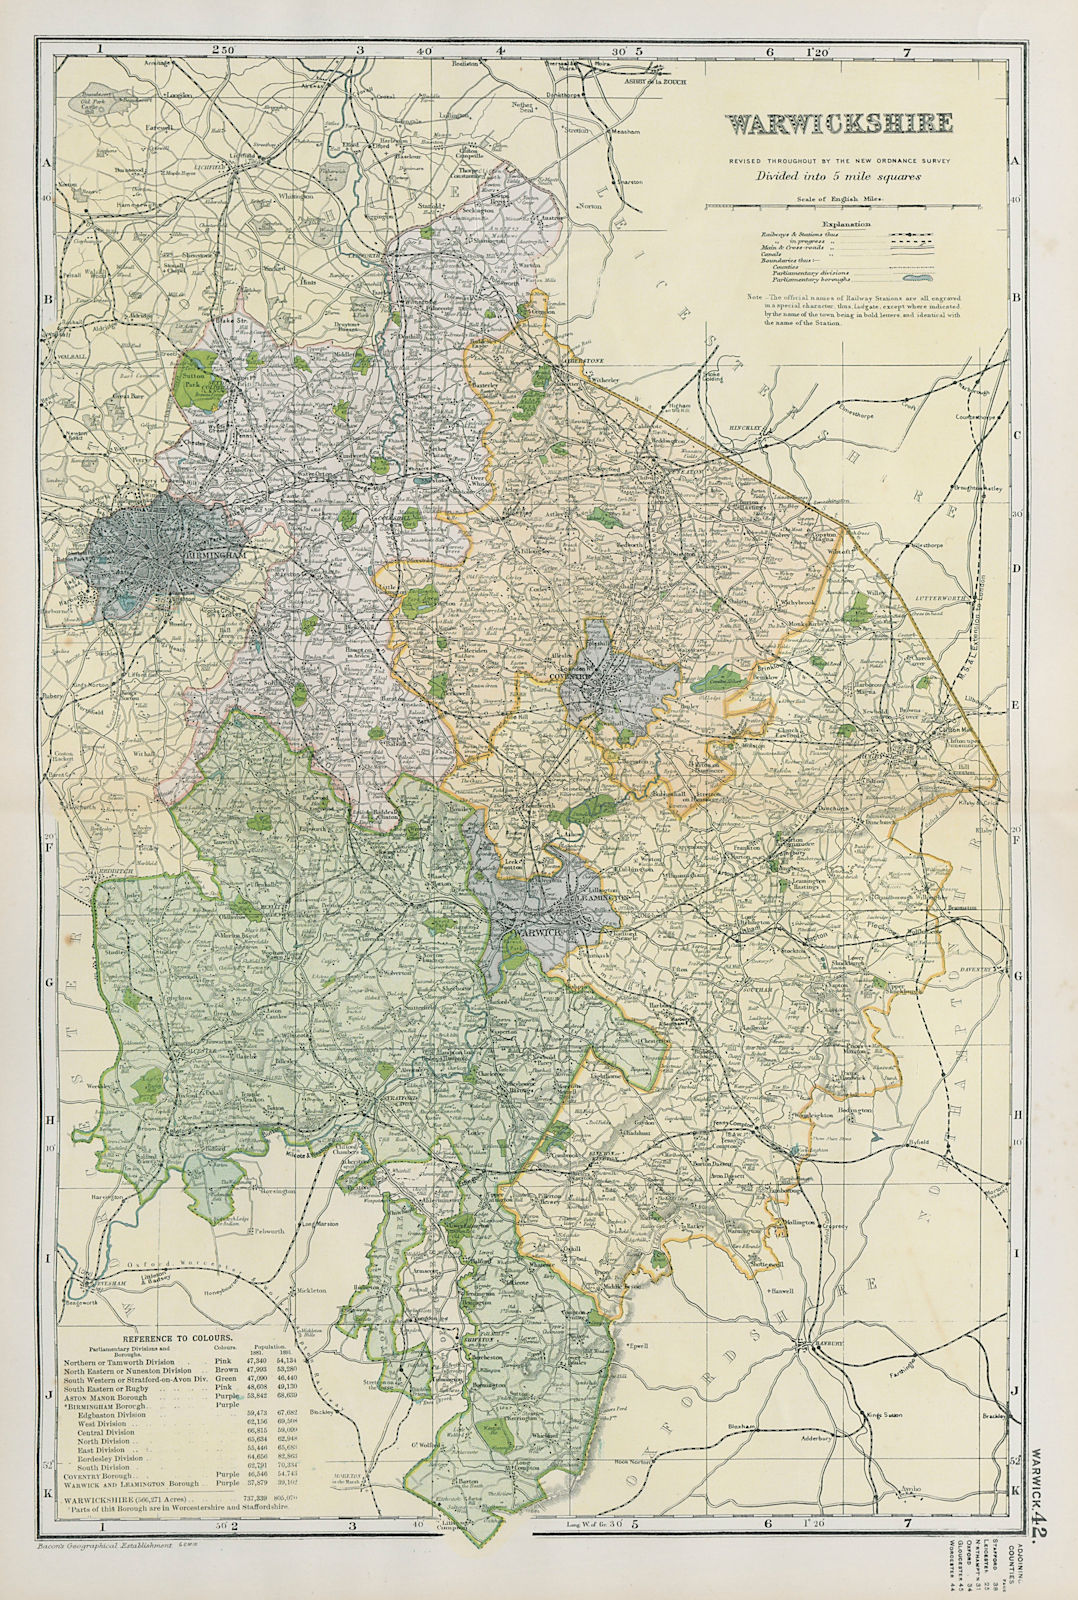 Associate Product WARWICKSHIRE. Showing Parliamentary divisions, boroughs & parks. BACON 1900 map